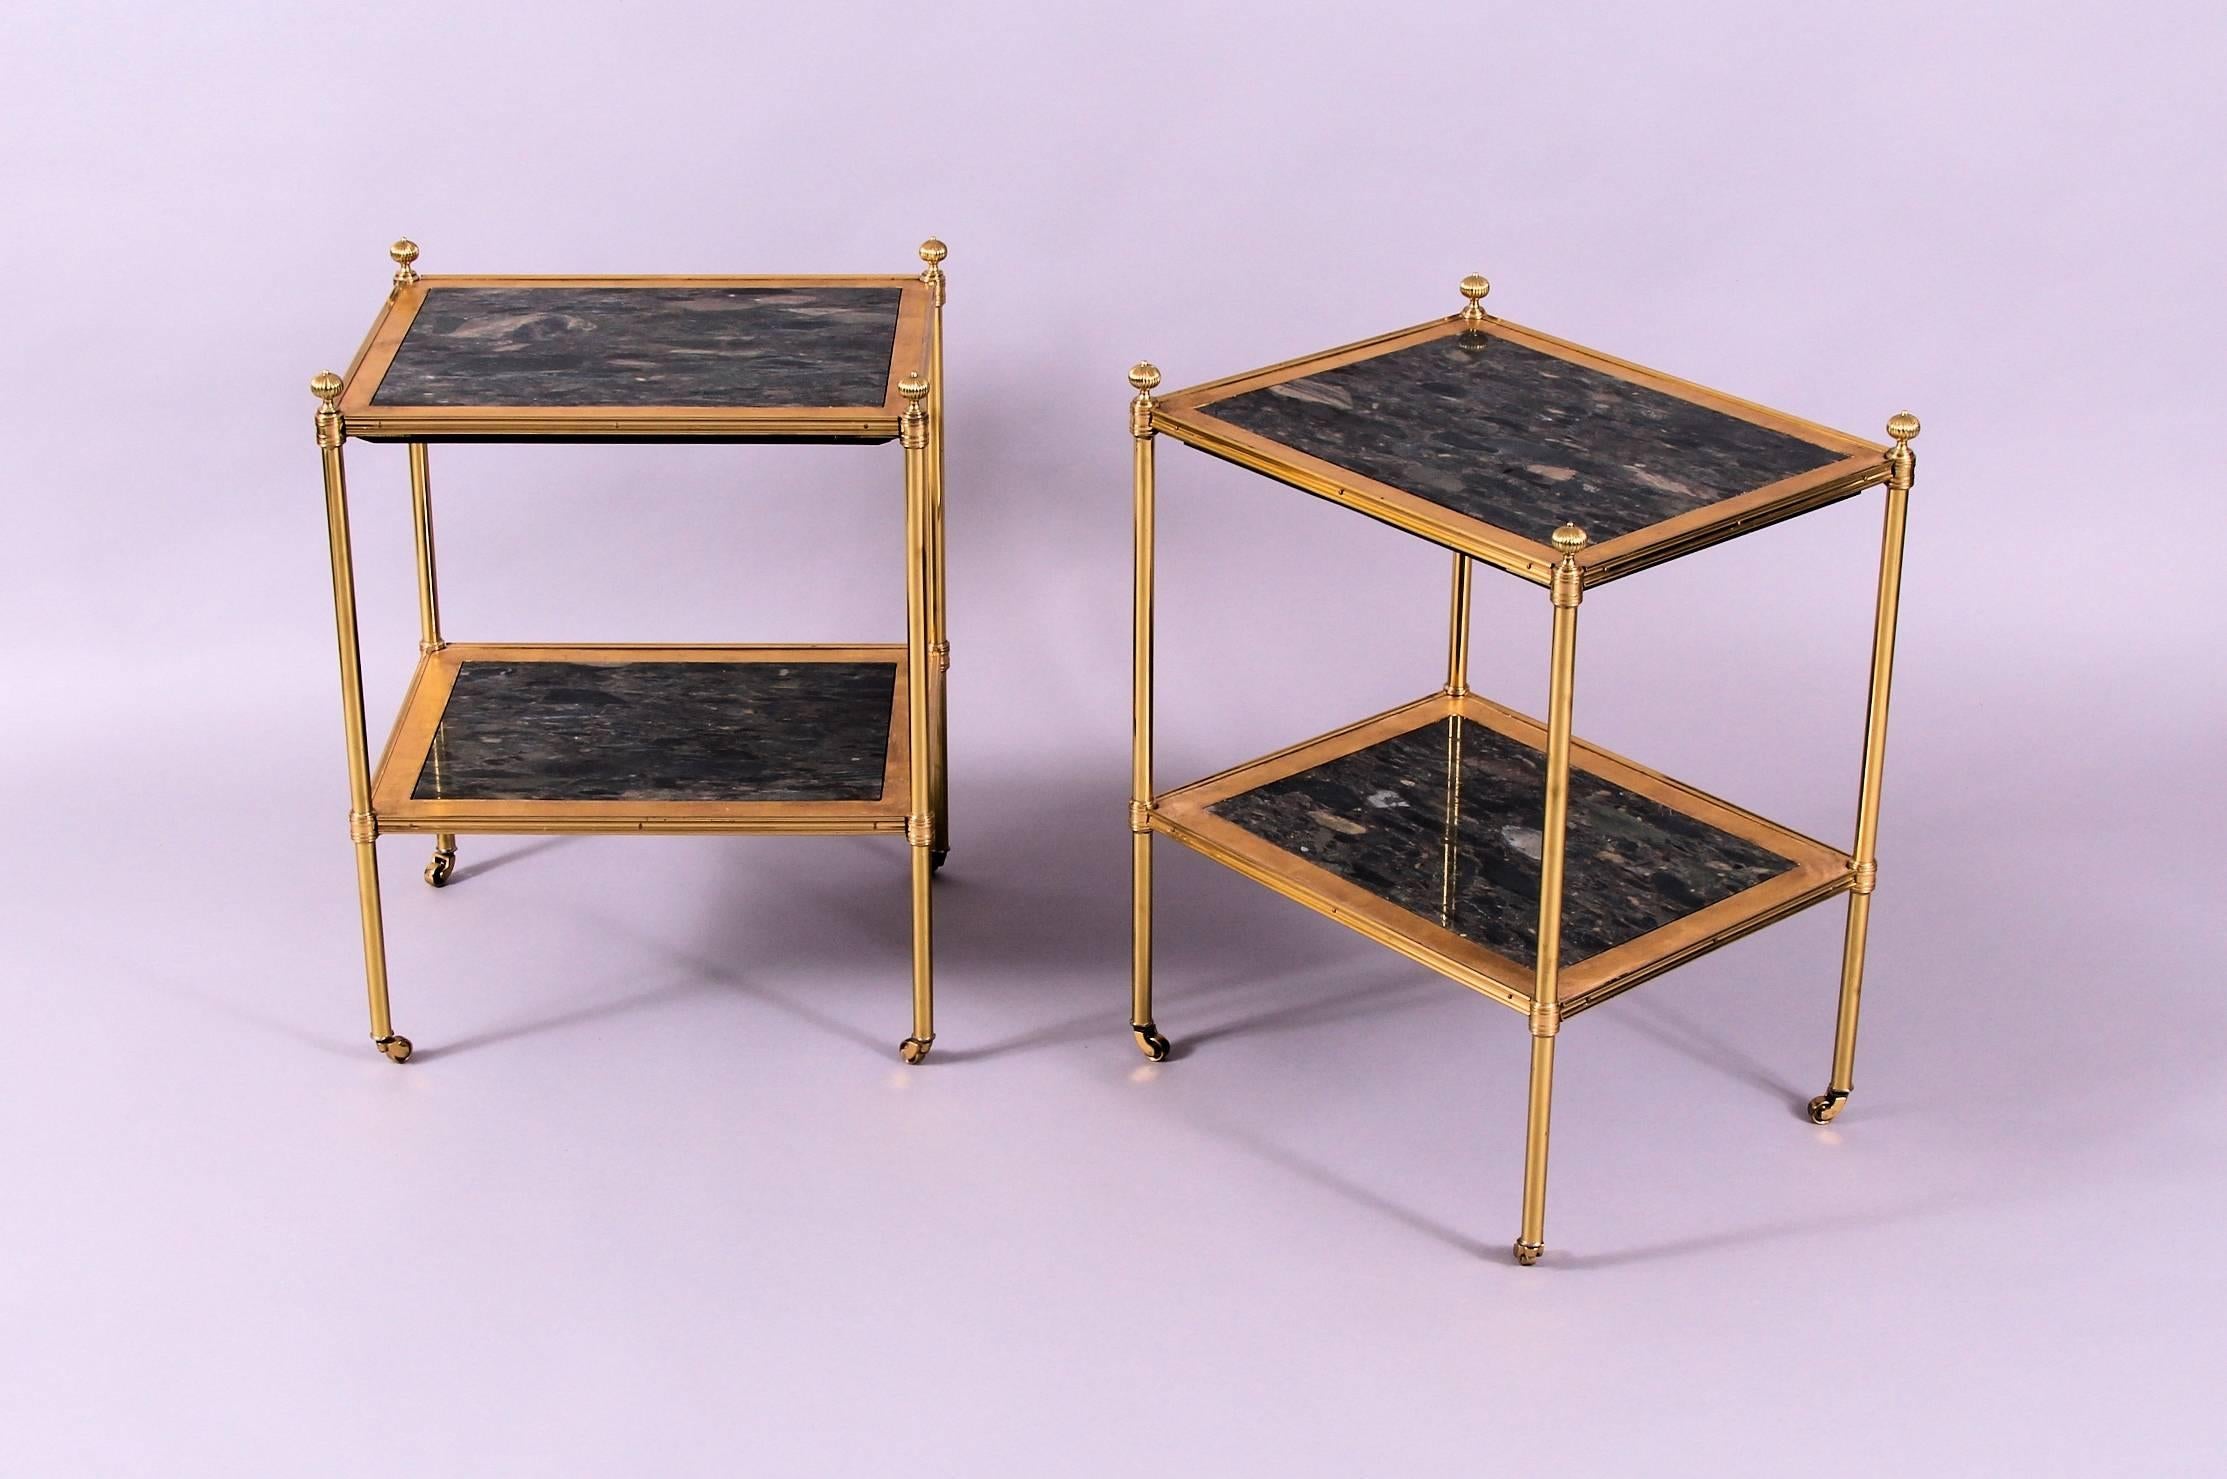 Exceptional and pair of early 20th century gilt brass étagère incorporating rare panels of Breccia Verde D'Egitto Roman marble. The gilding and marble exhibit the most wonderful and contrasting of colours to deliver refined elegance and beauty. They